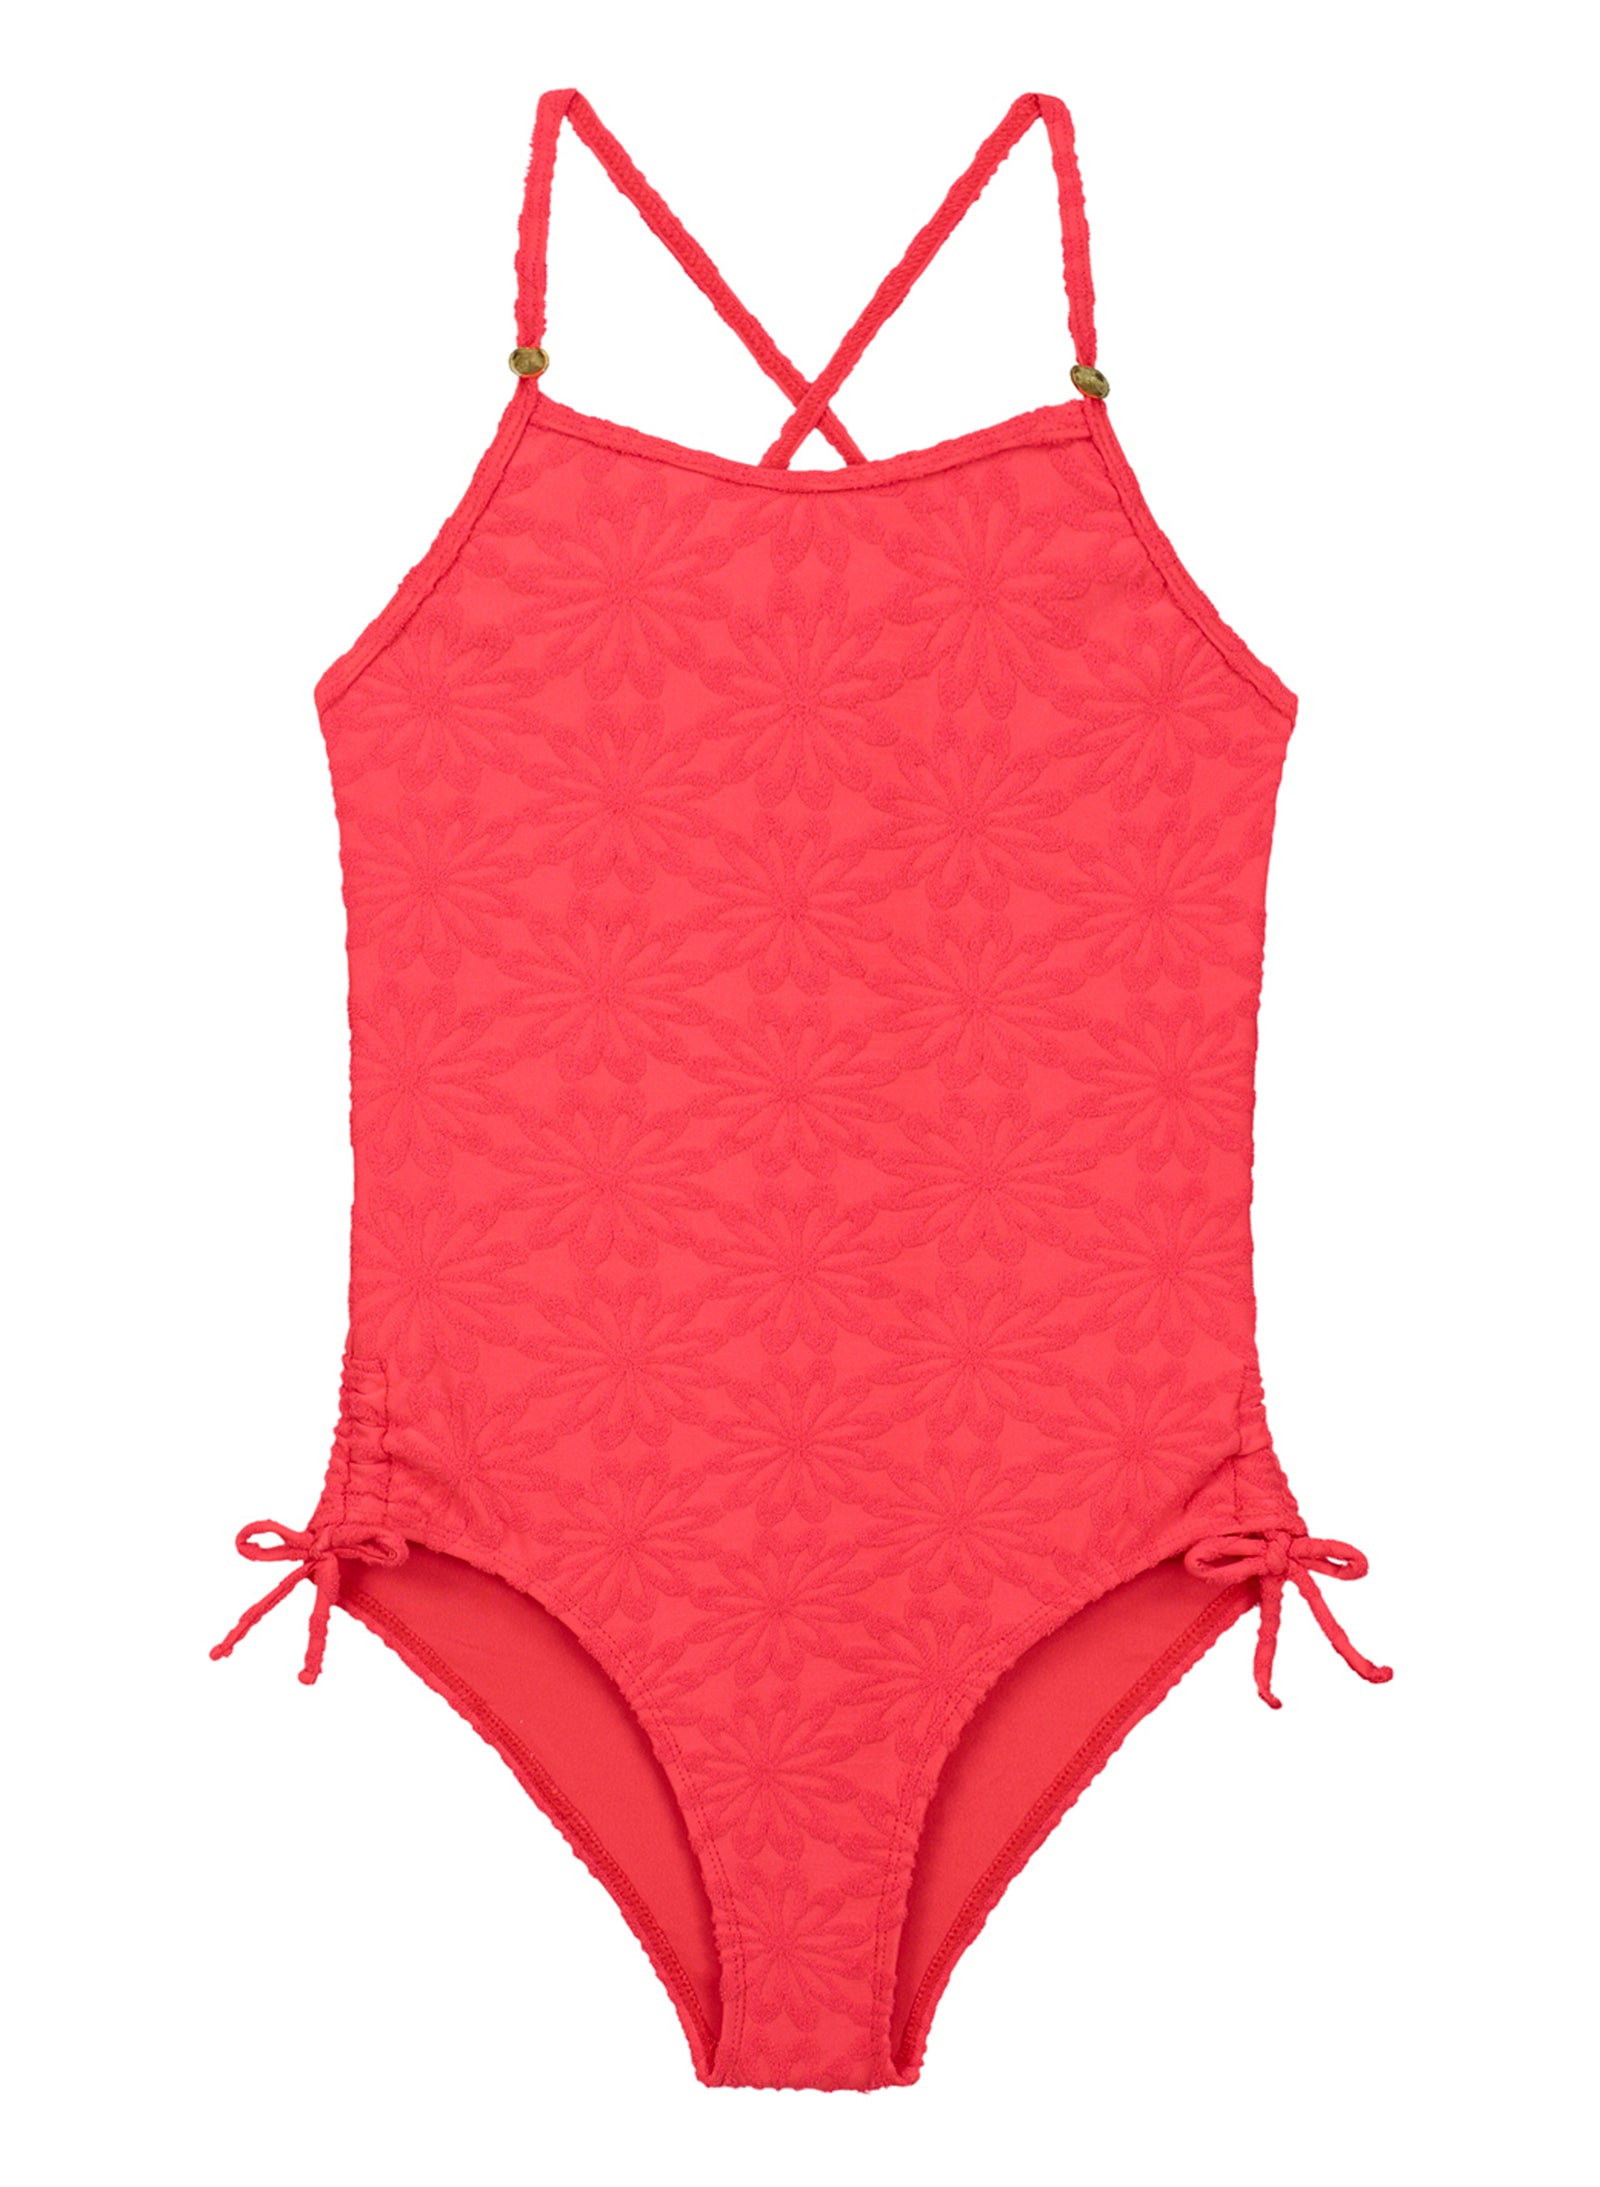 Girls LOIS swimsuit daisy structure